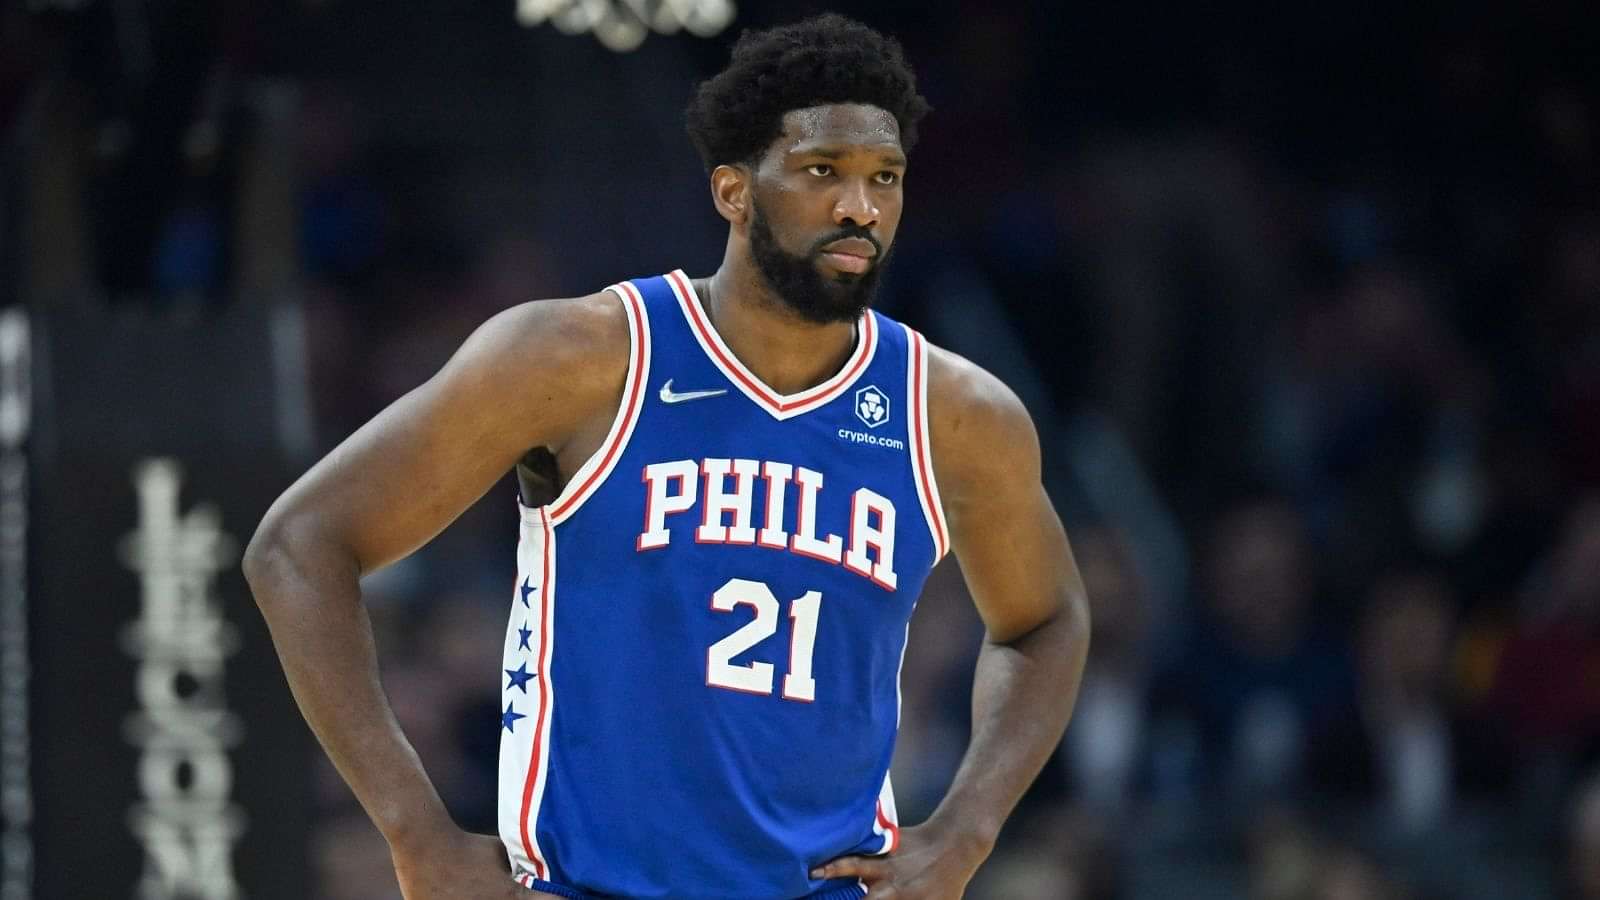 "Deandre Jordan has more All-NBA First Teams than Joel Embiid": NBA Twitter reacts to The Process not making First Team post MVP snub